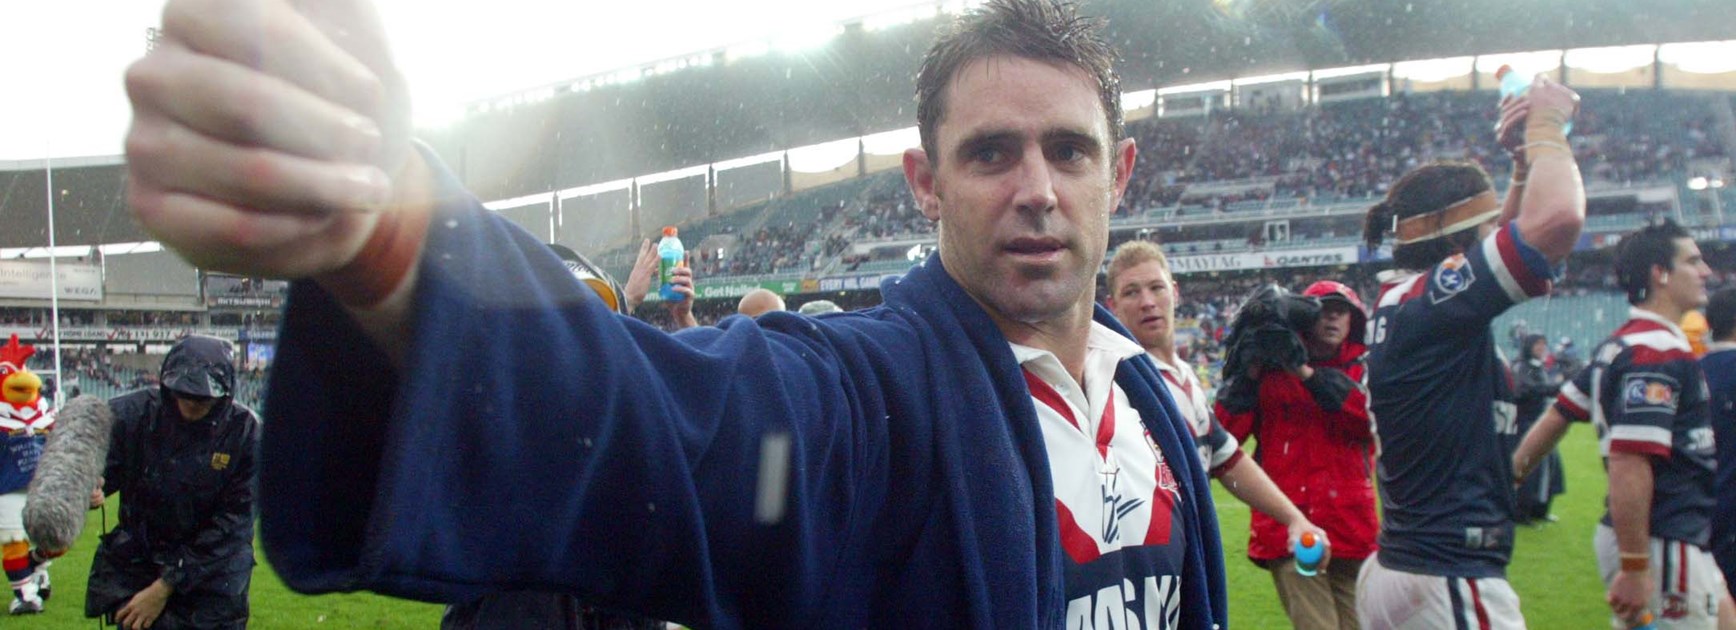 Brad Fittler acknowledges the fans after a Roosters triumph.